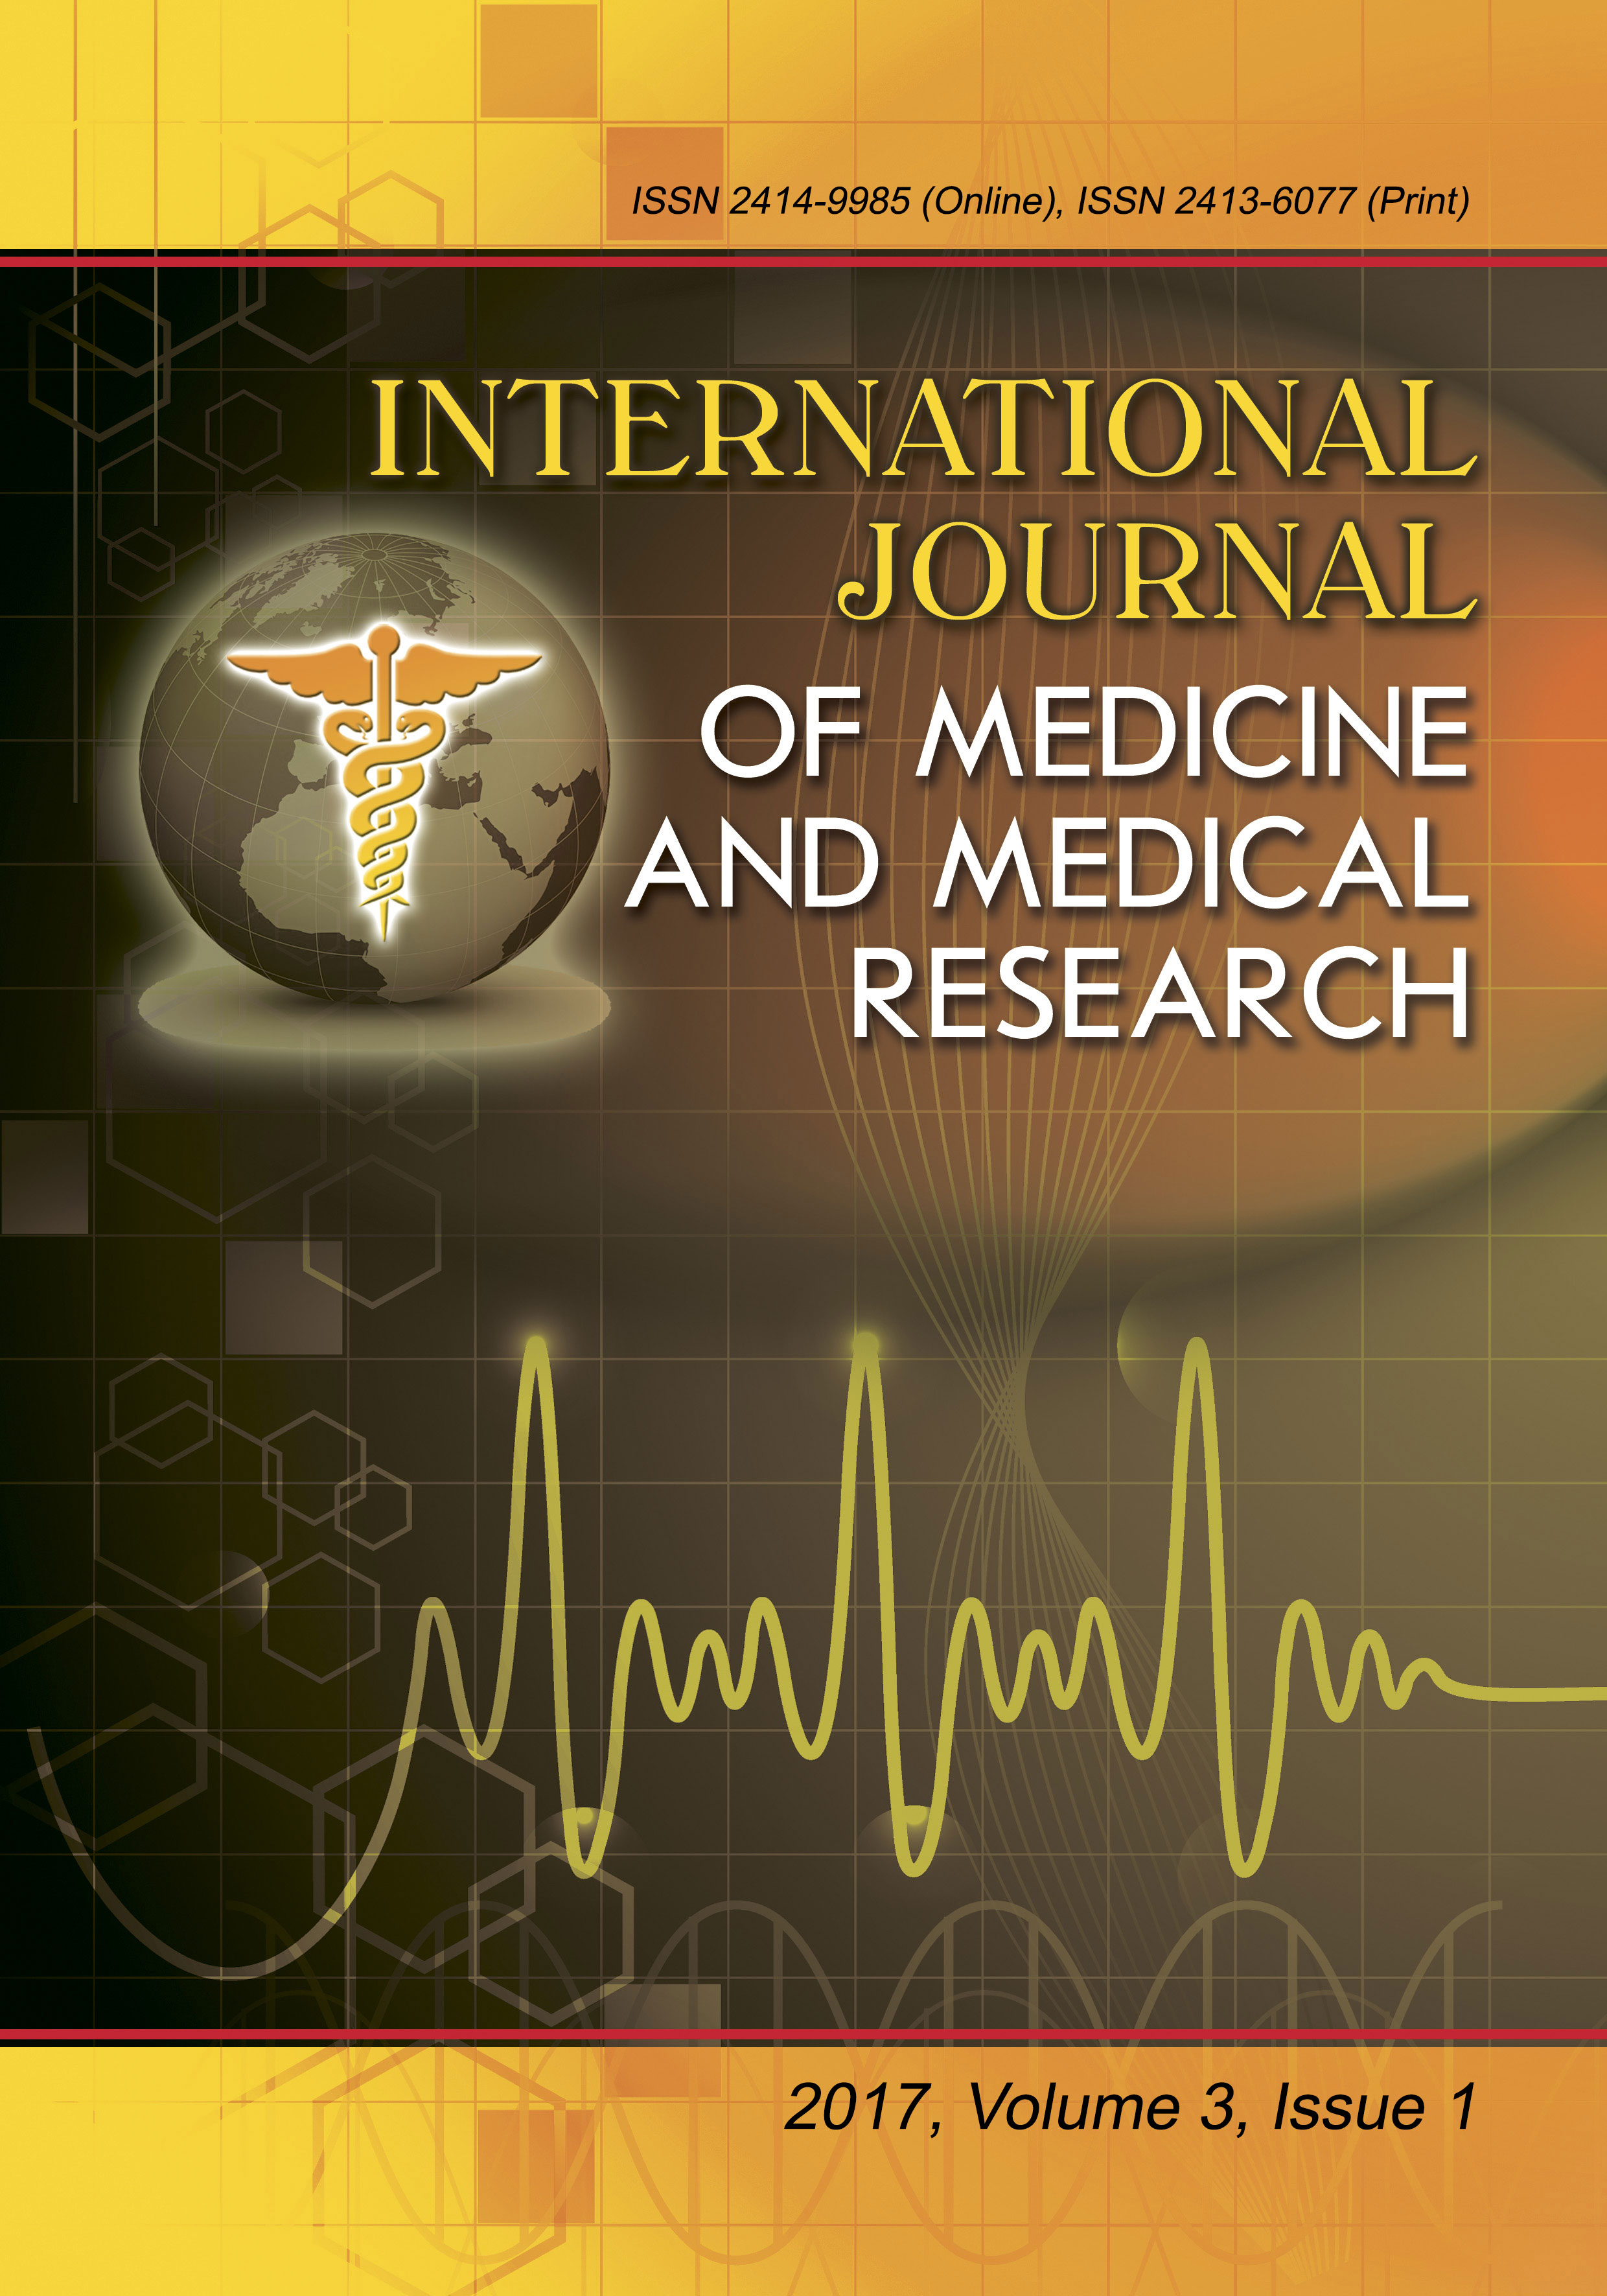 					View Vol. 3 No. 1 (2017): International Journal of Medicine and Medical Research
				